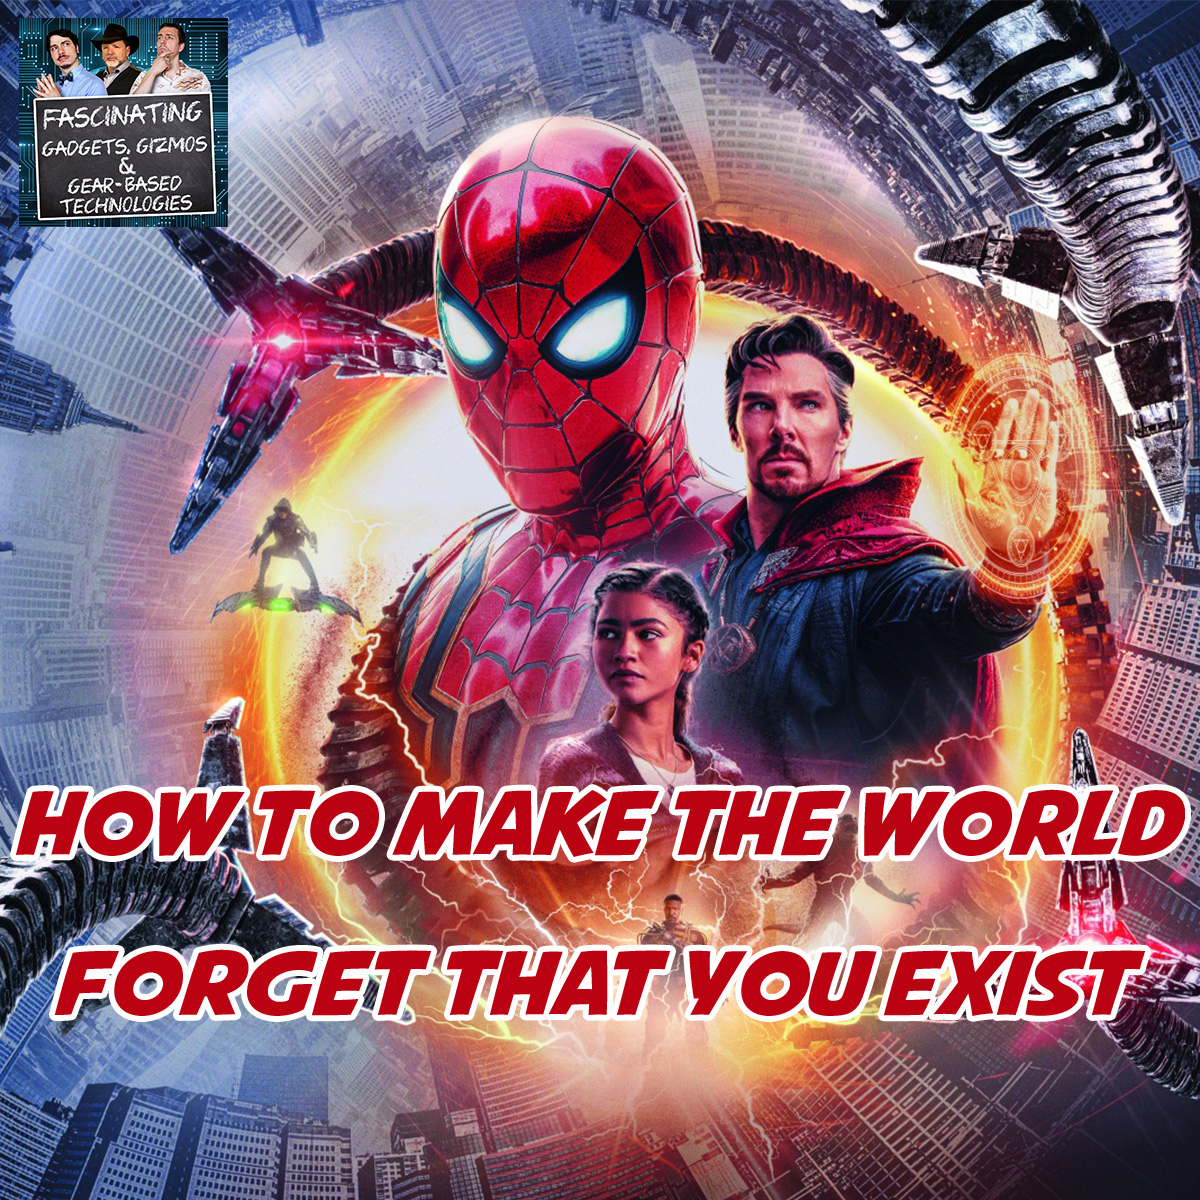 You are currently viewing Ep. 125 How To Make The World Forget That You Existed